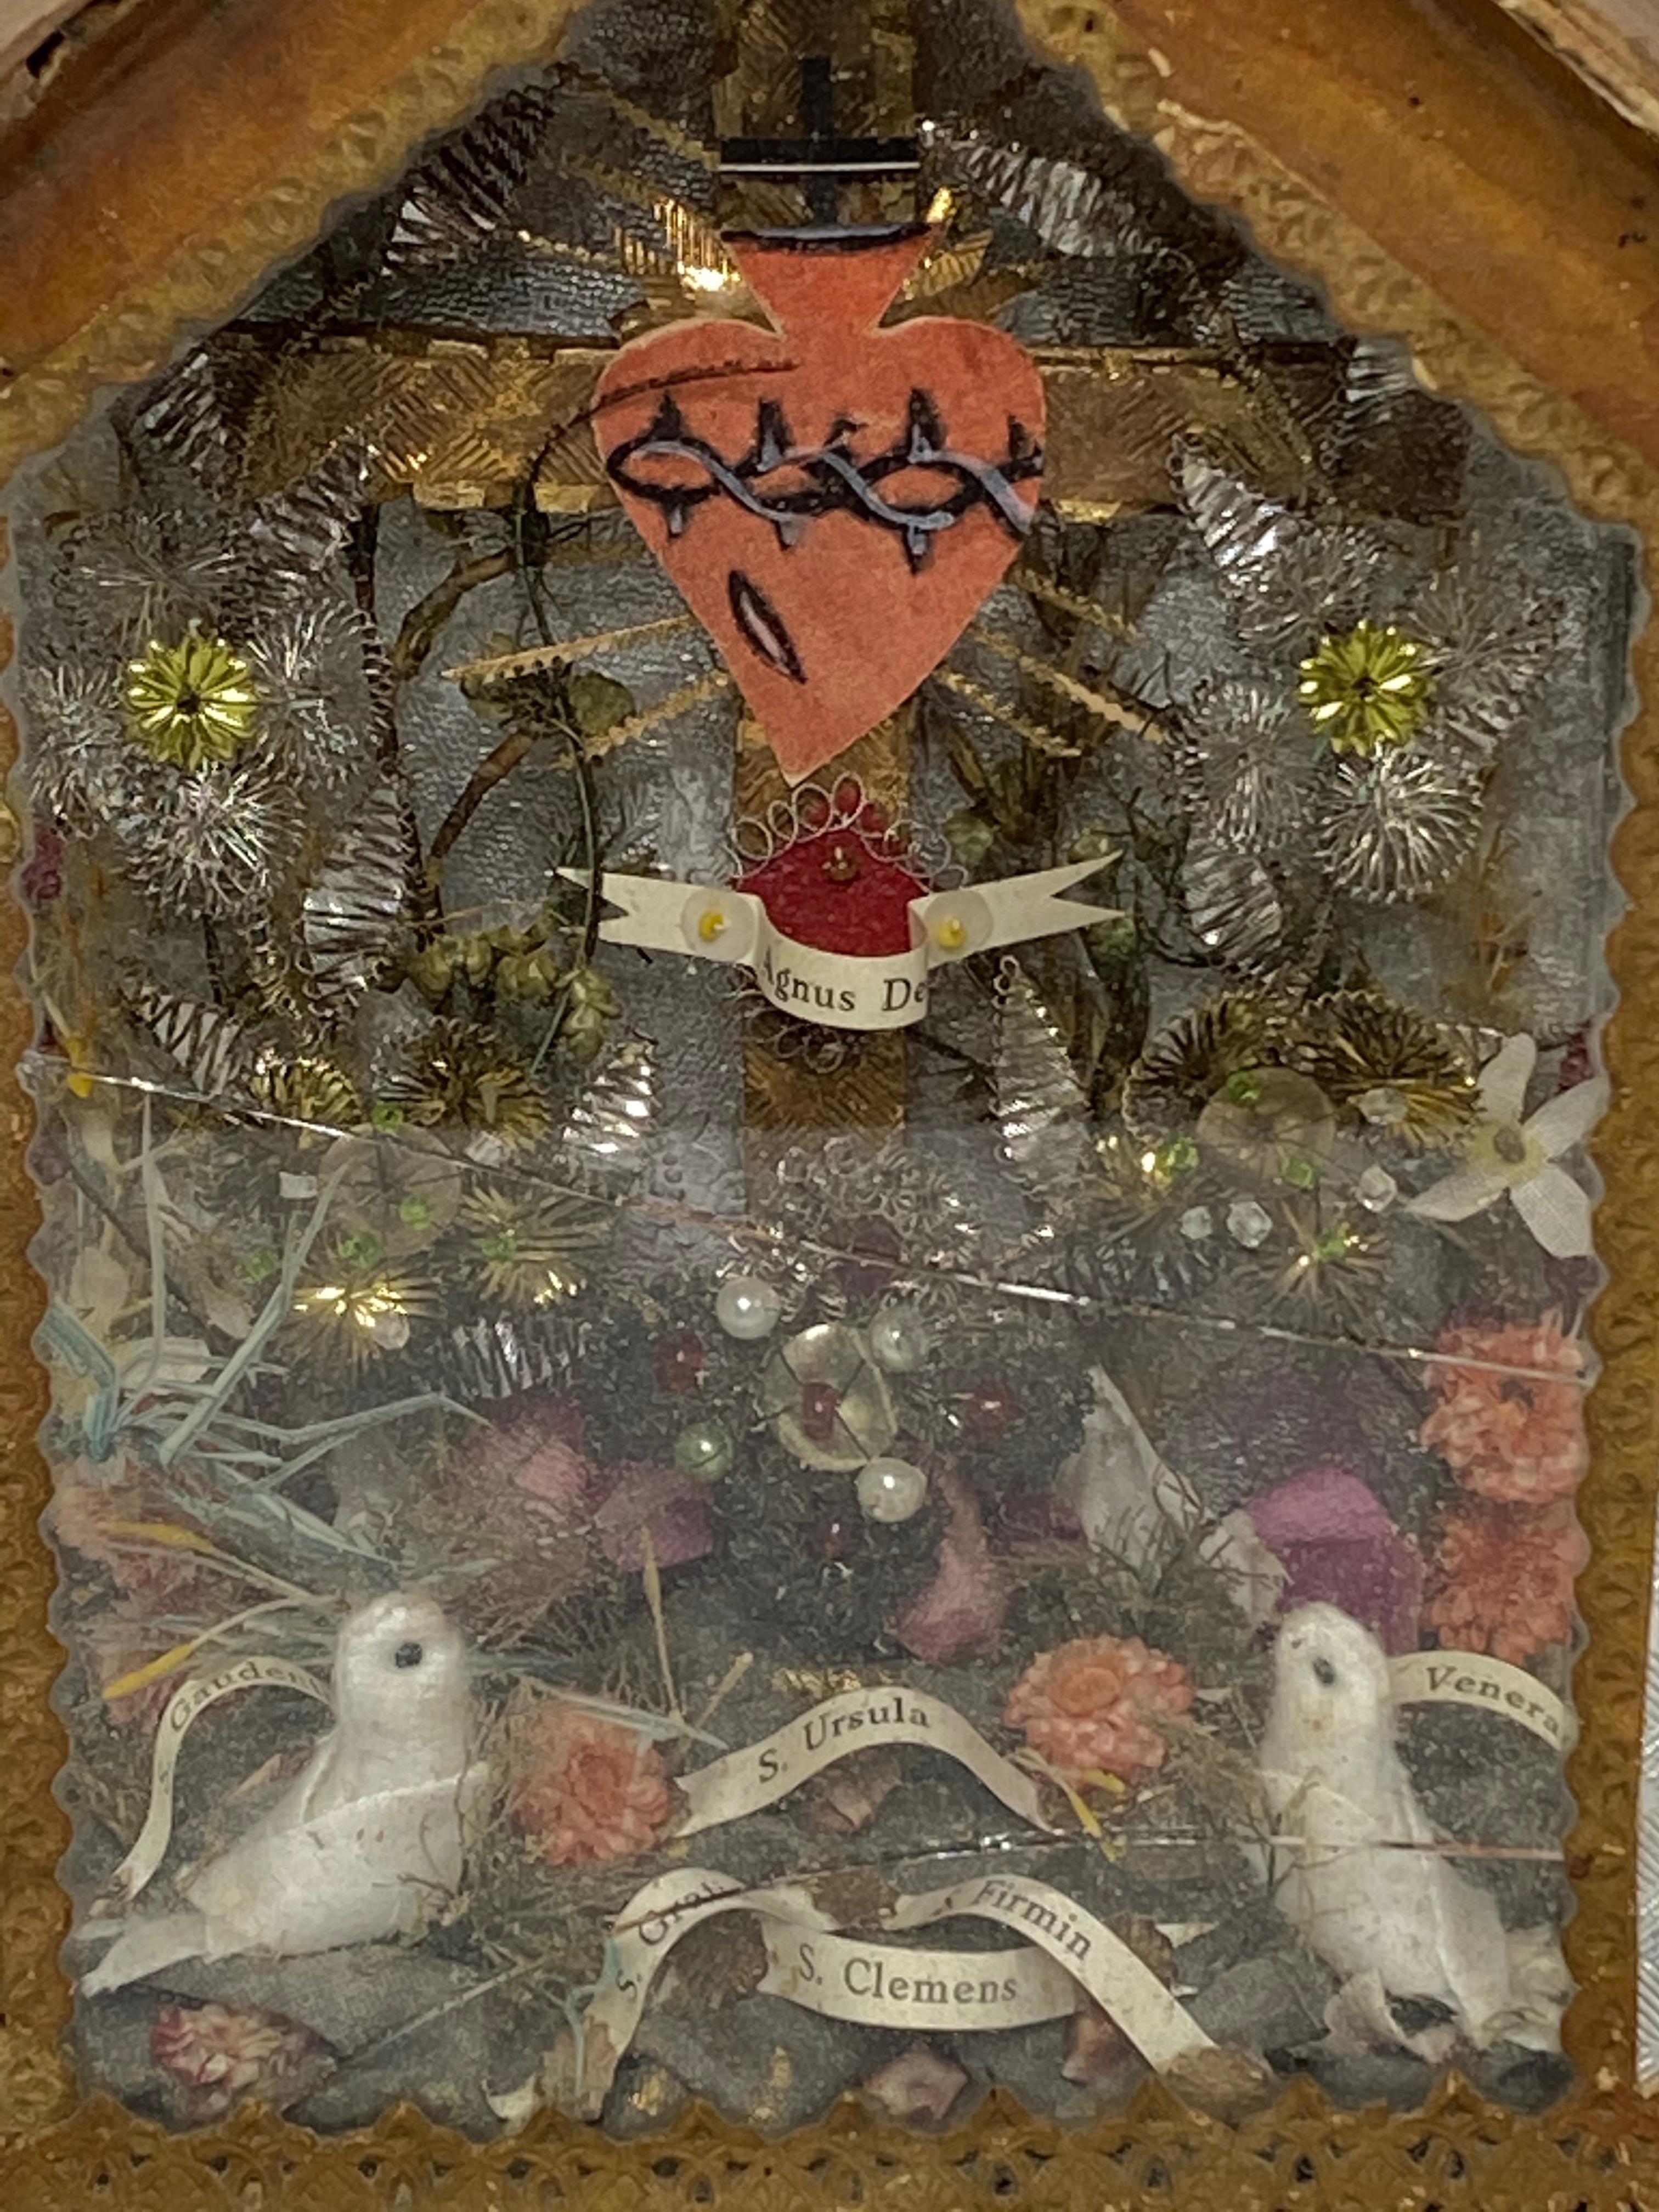 This antique reliquary showcase contains relics of Saint. It is made of cloth, glass, tinsel, wood and cardboard. Its a monastery work mostly made by nuns. It was found at an estate sale in Vienna, Austria. Some cracks in the glass but this is